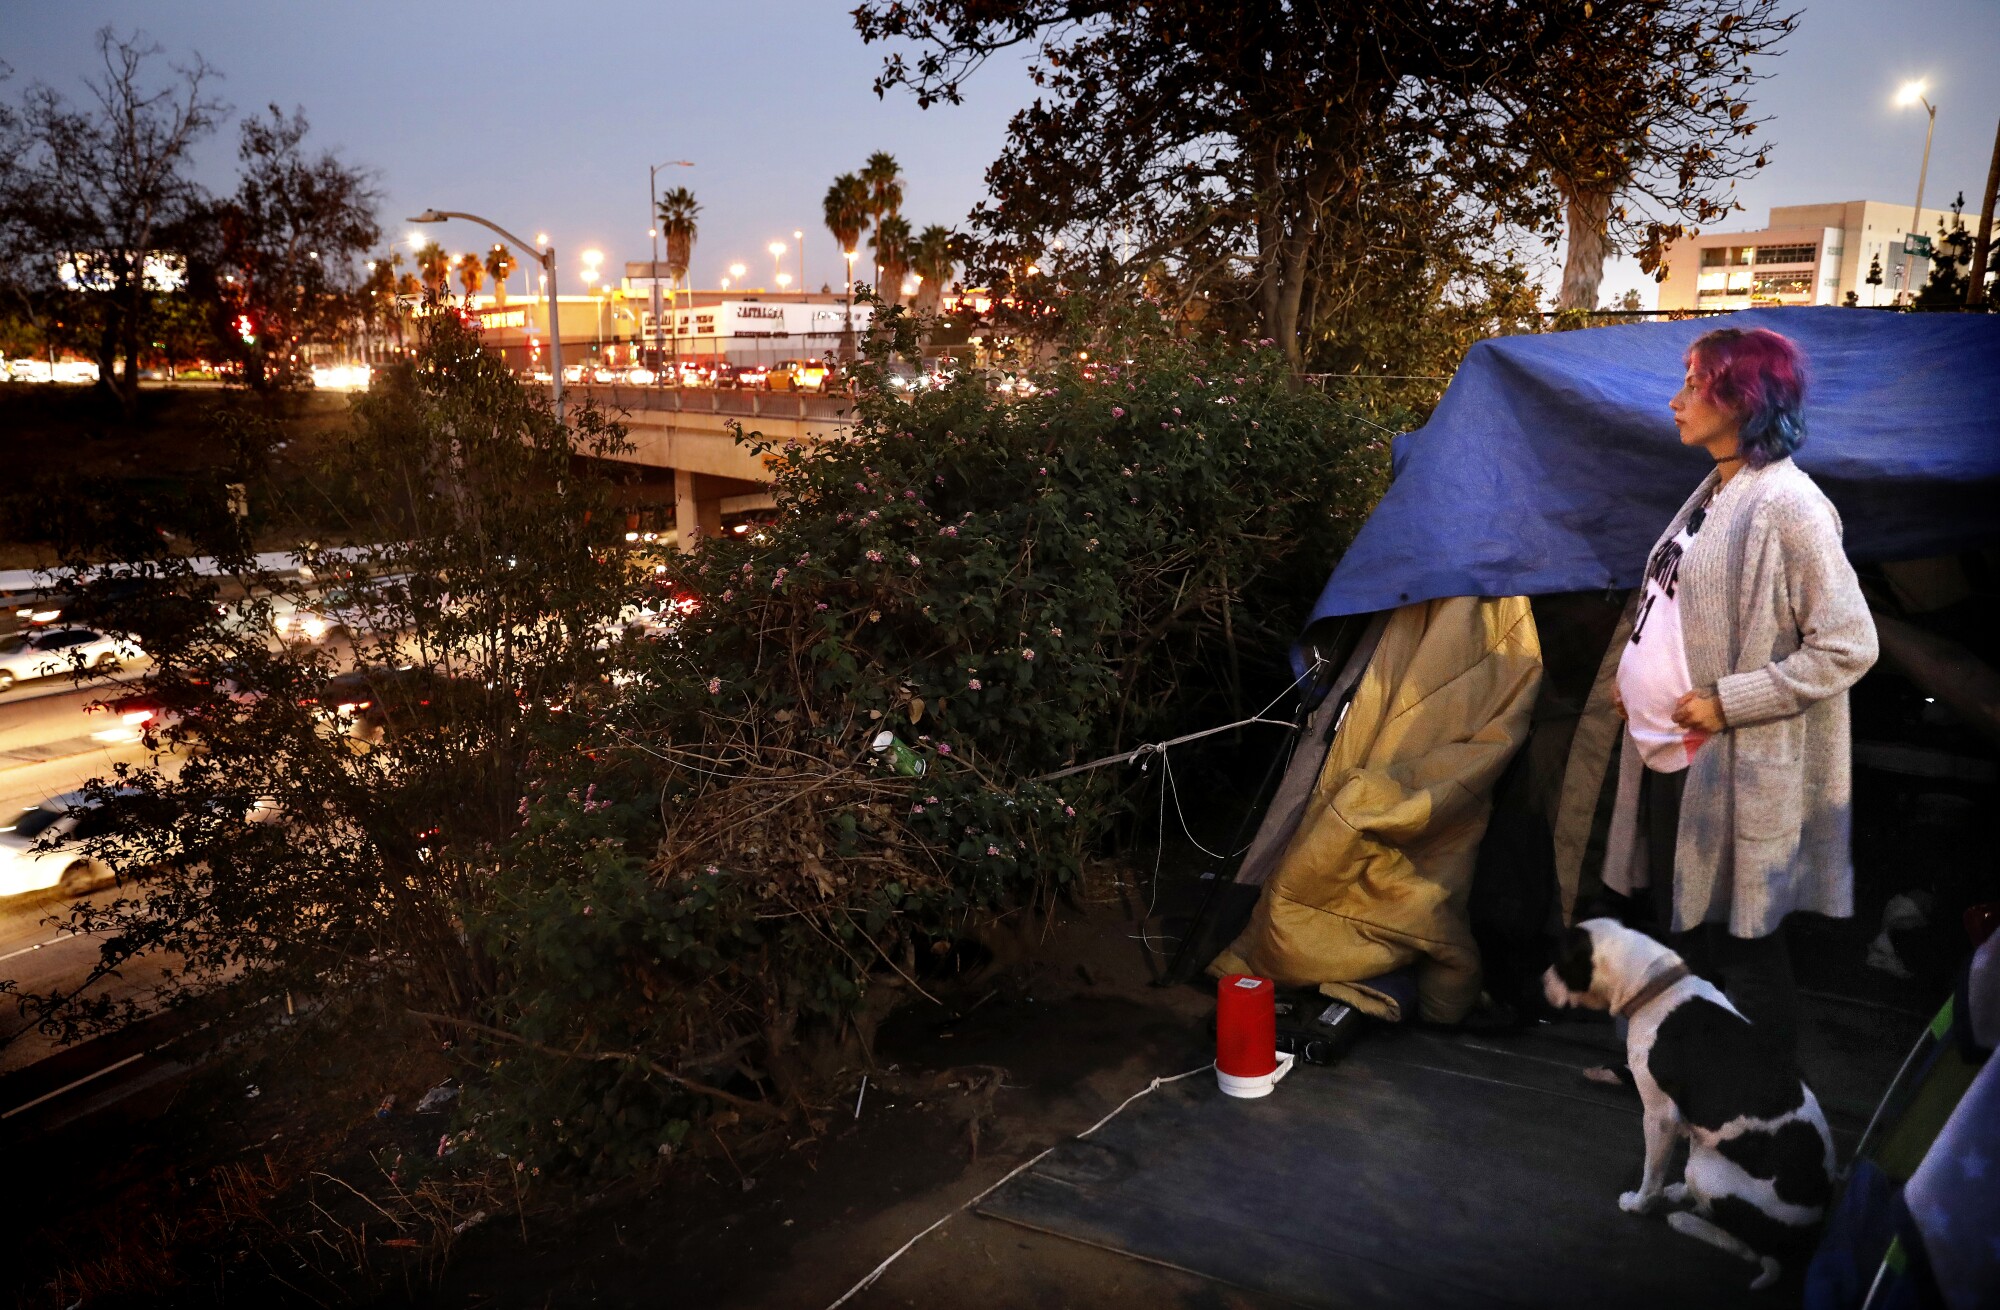 A pregnant woman standing outside a tent with a dog overlooking rushing cars on a freeway